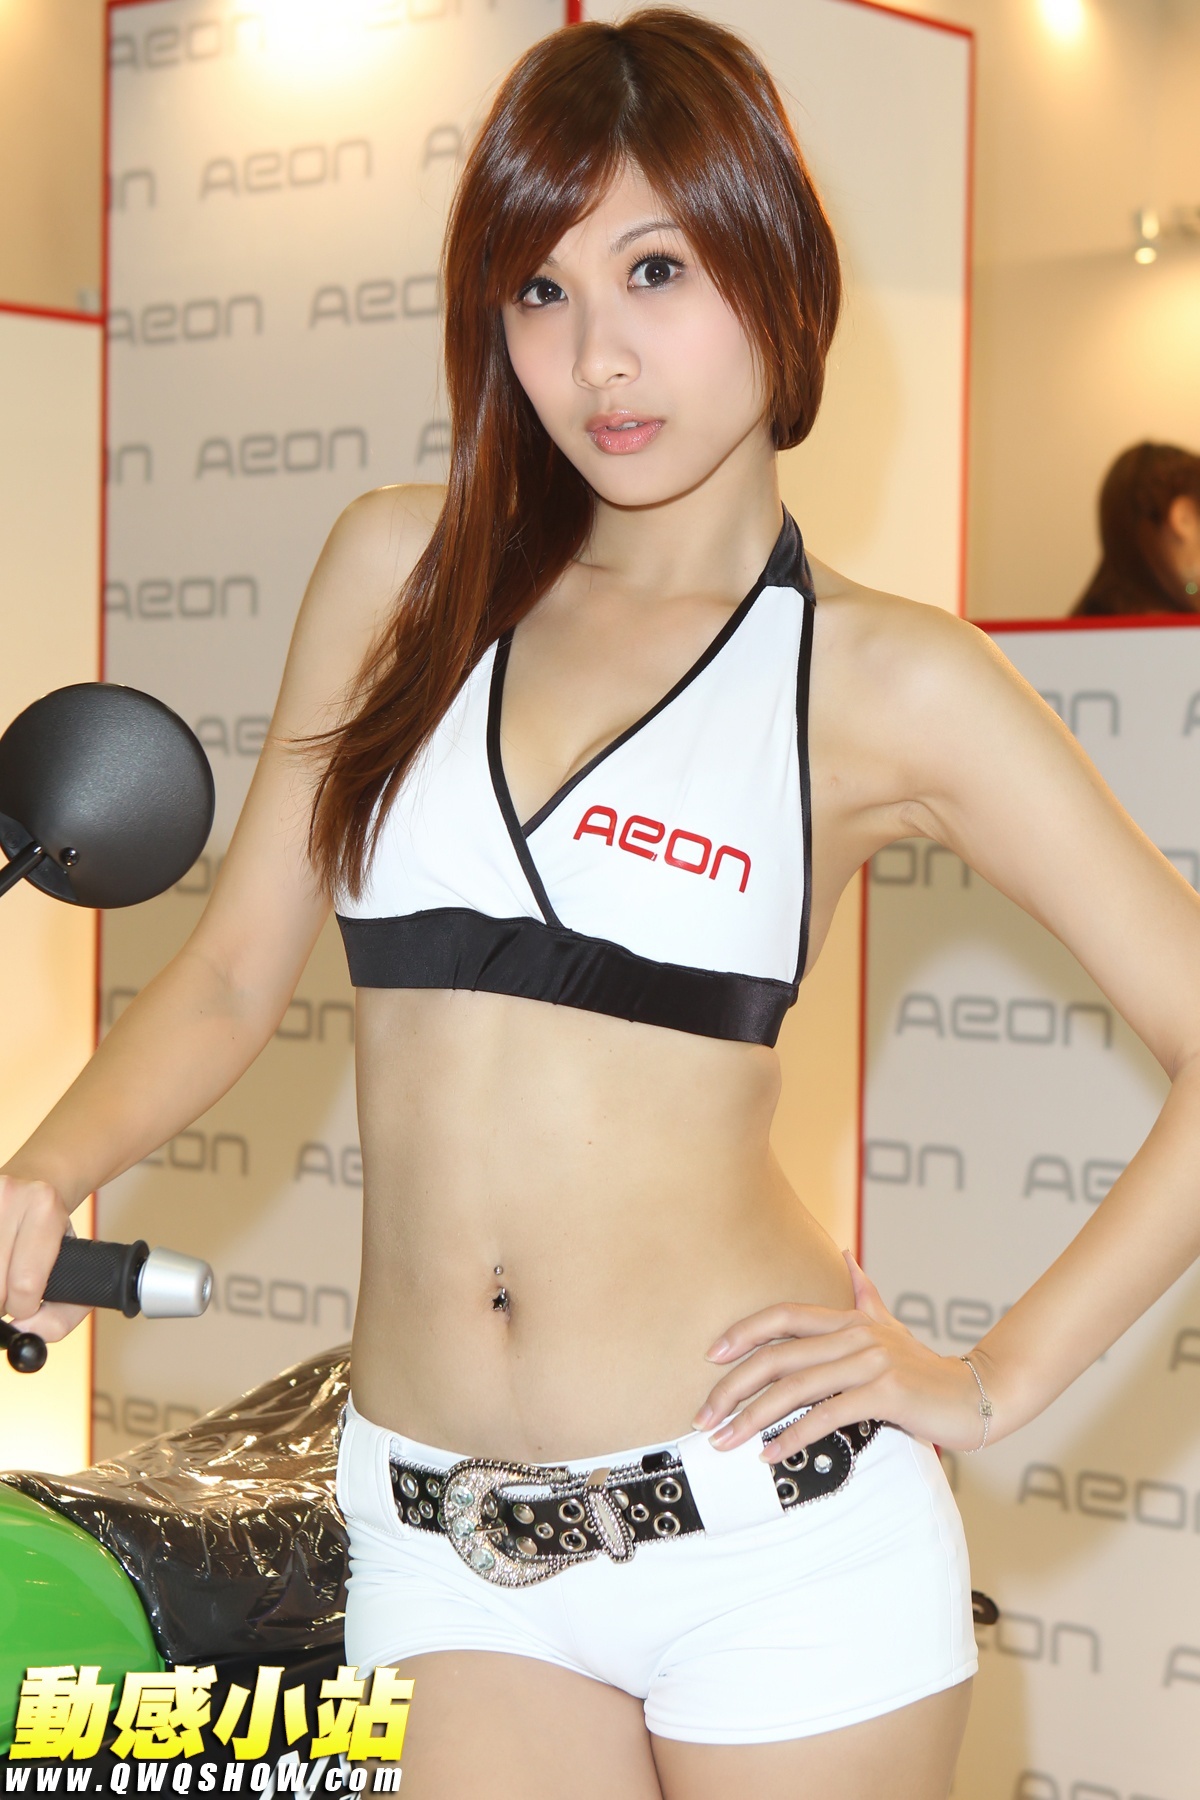 A set of pictures of aeon hot girls dance in locomotive show